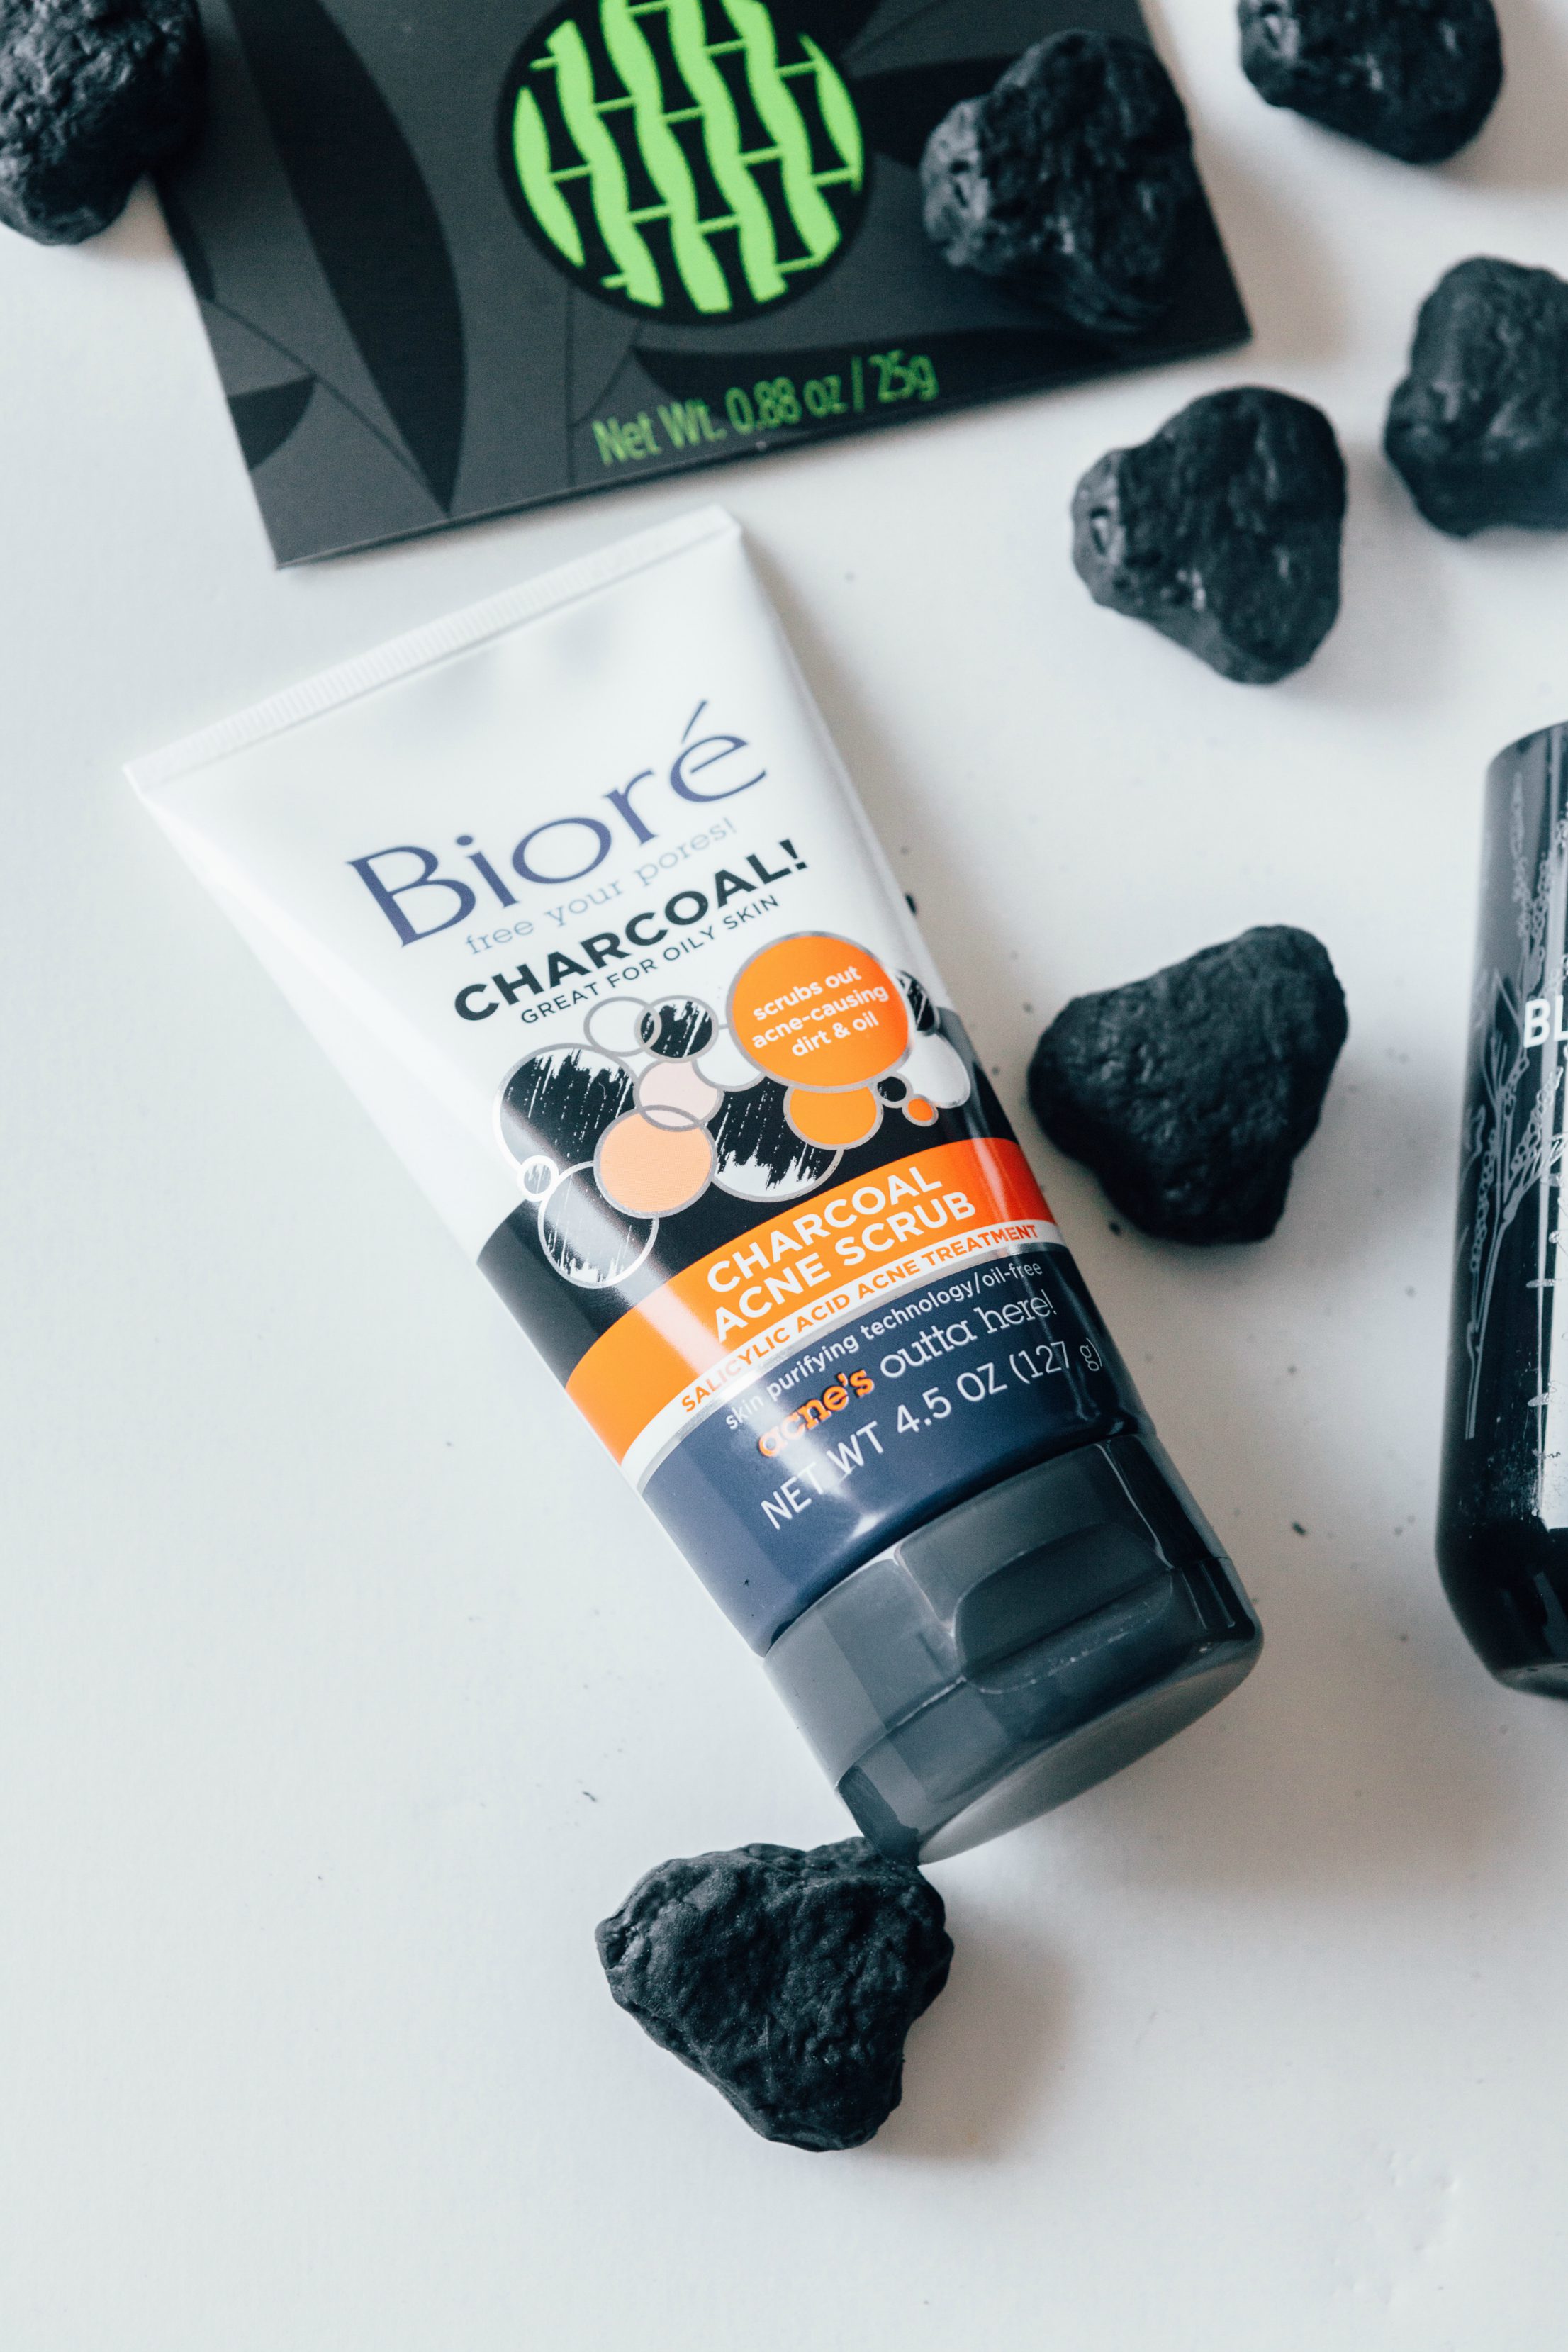 Charcoal-Infused Beauty Products from Biore Charcoal Acne Scrub